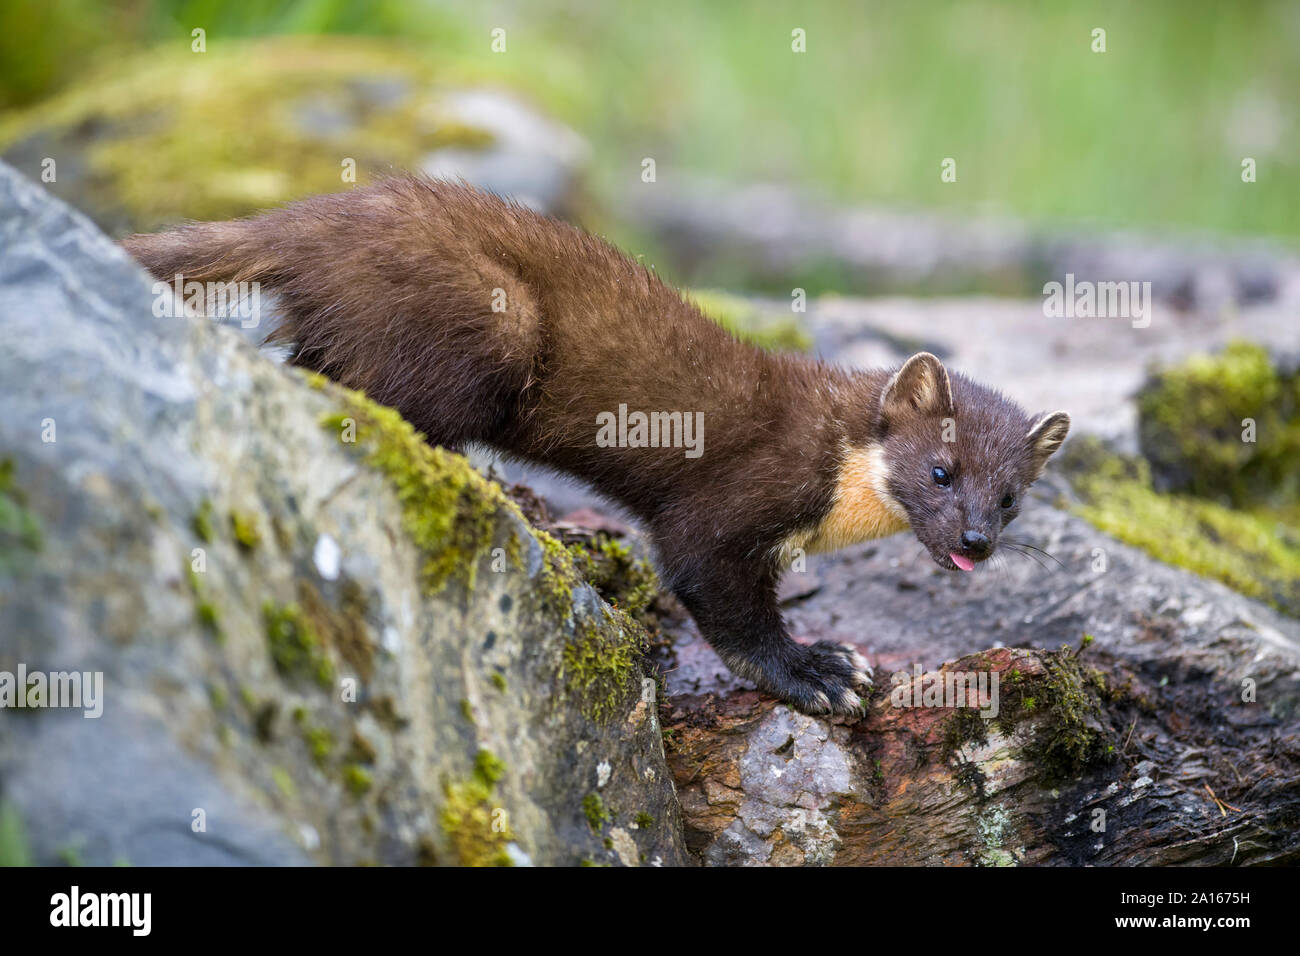 Pine marten in forest at Scotland Stock Photo